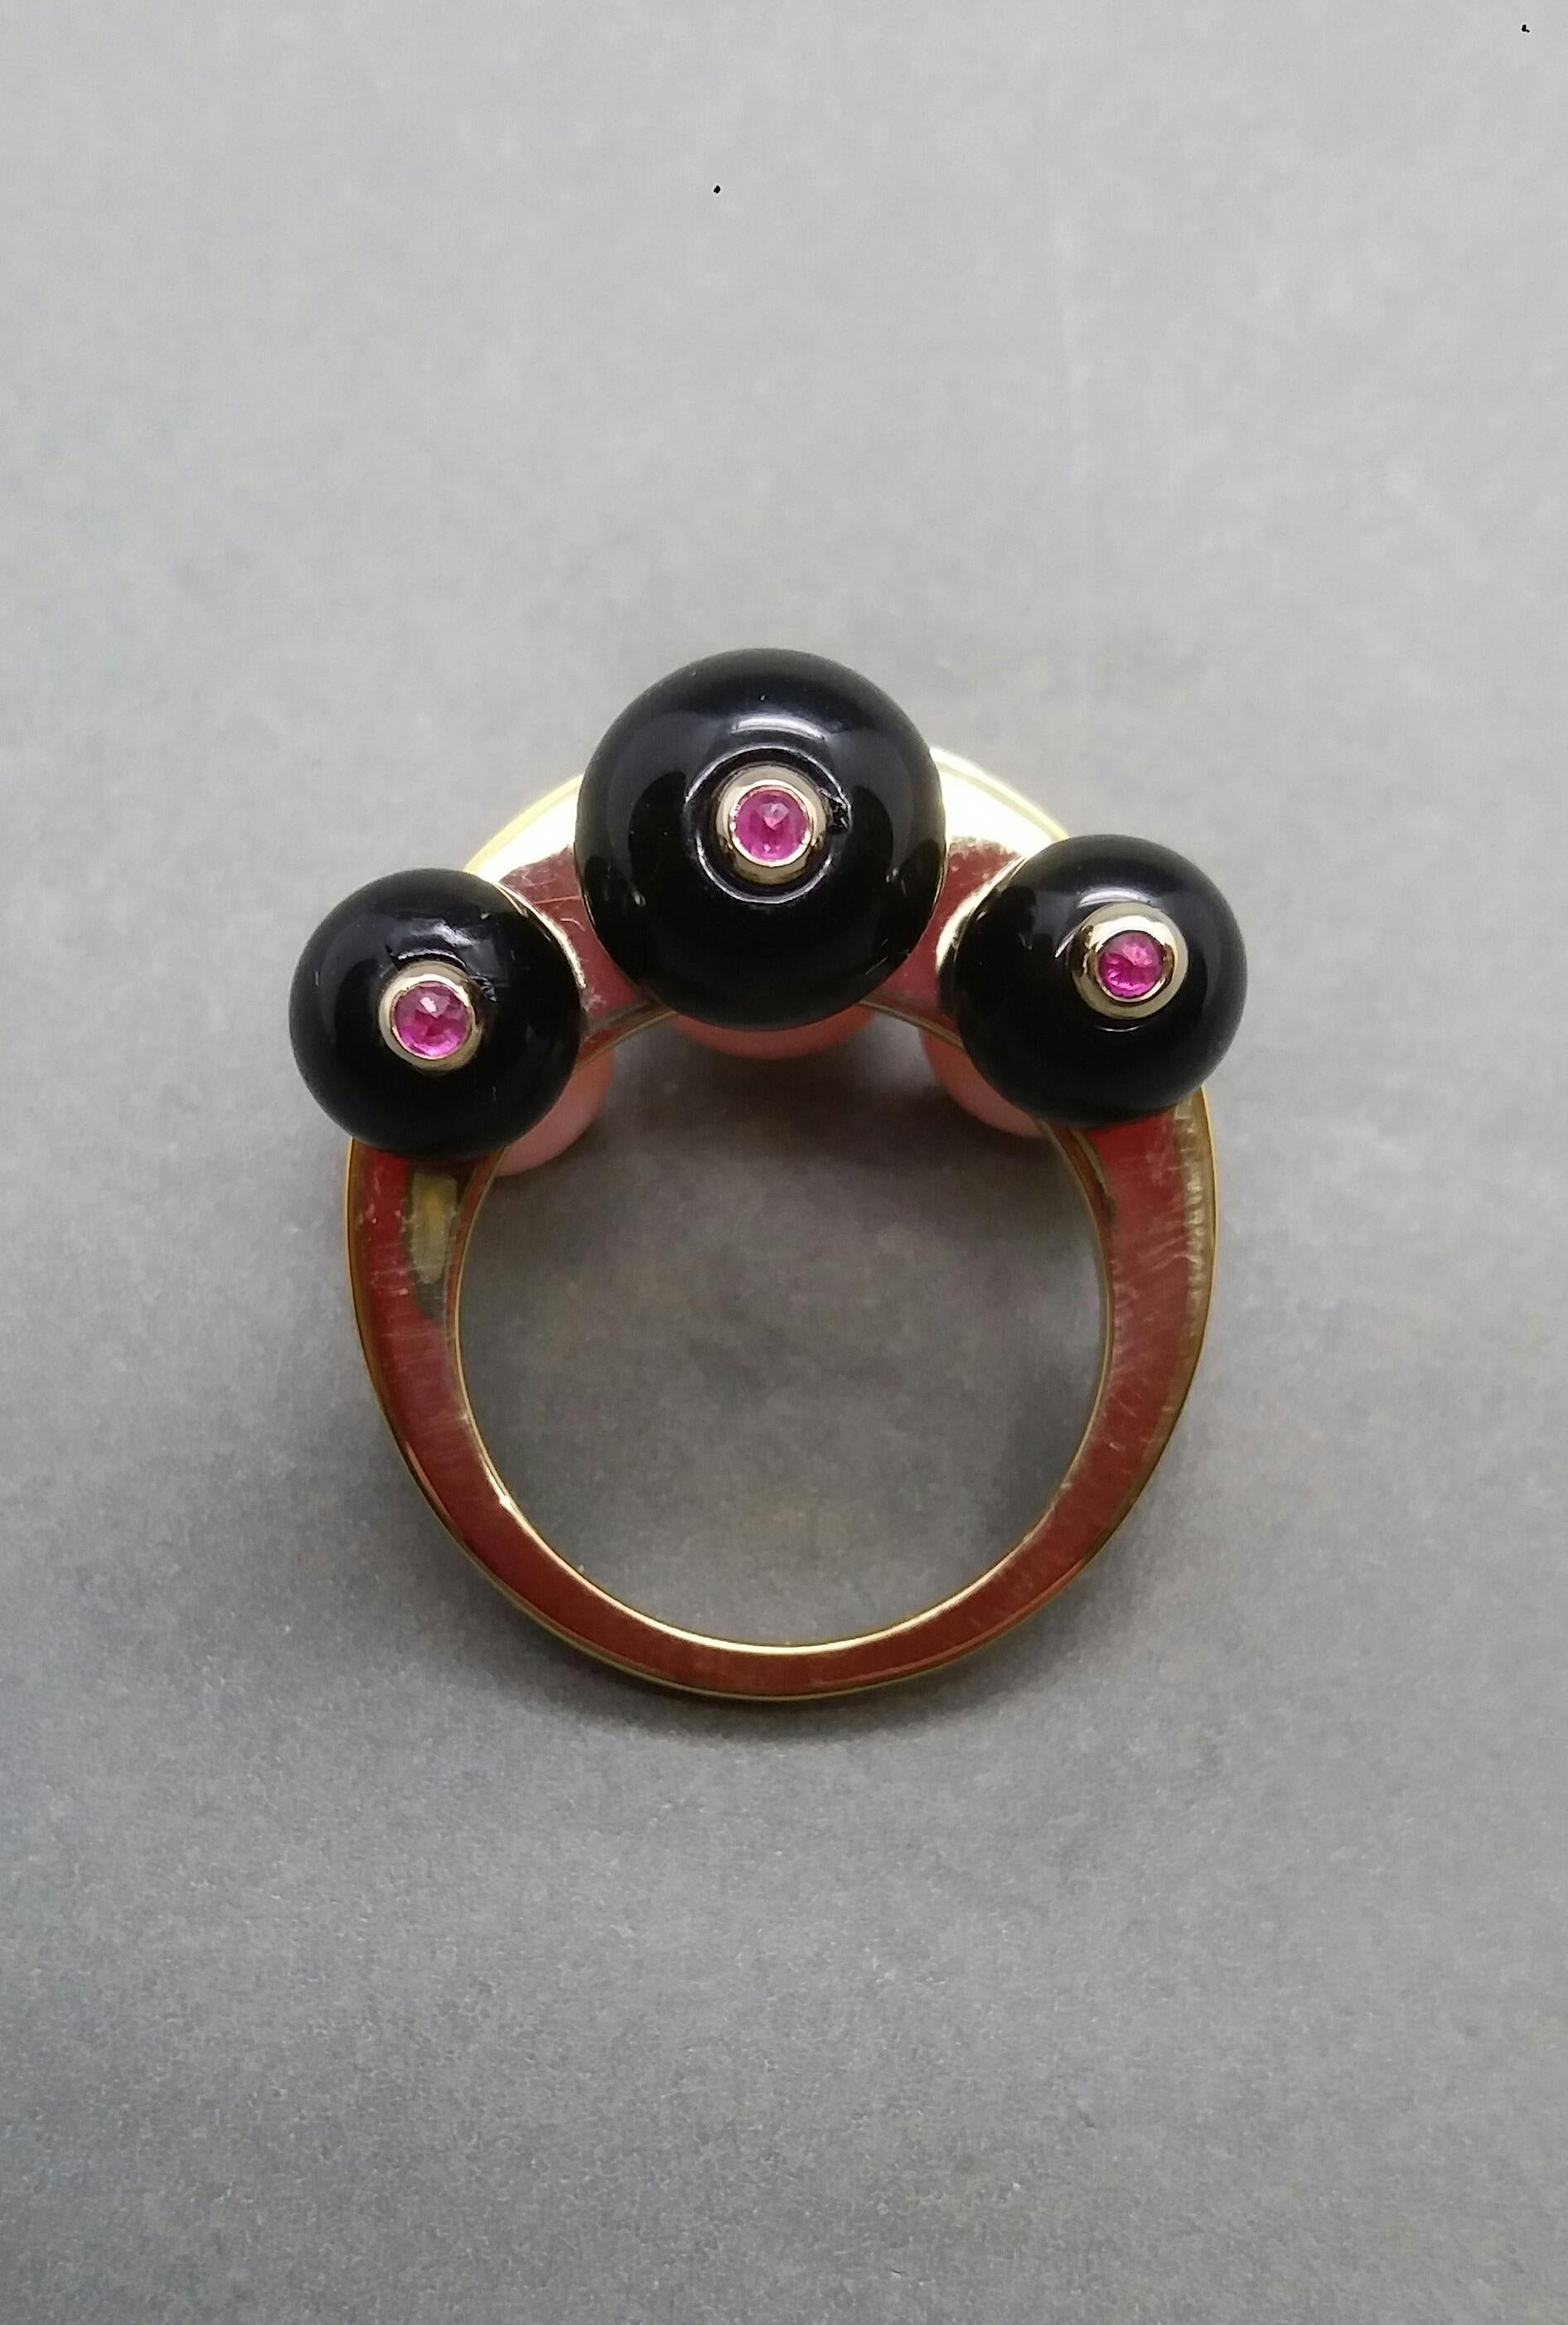 14 Karat Gold Black Onyx and Pink Opal Round Beads Rubies Black Diamonds Ring In Good Condition For Sale In Bangkok, TH